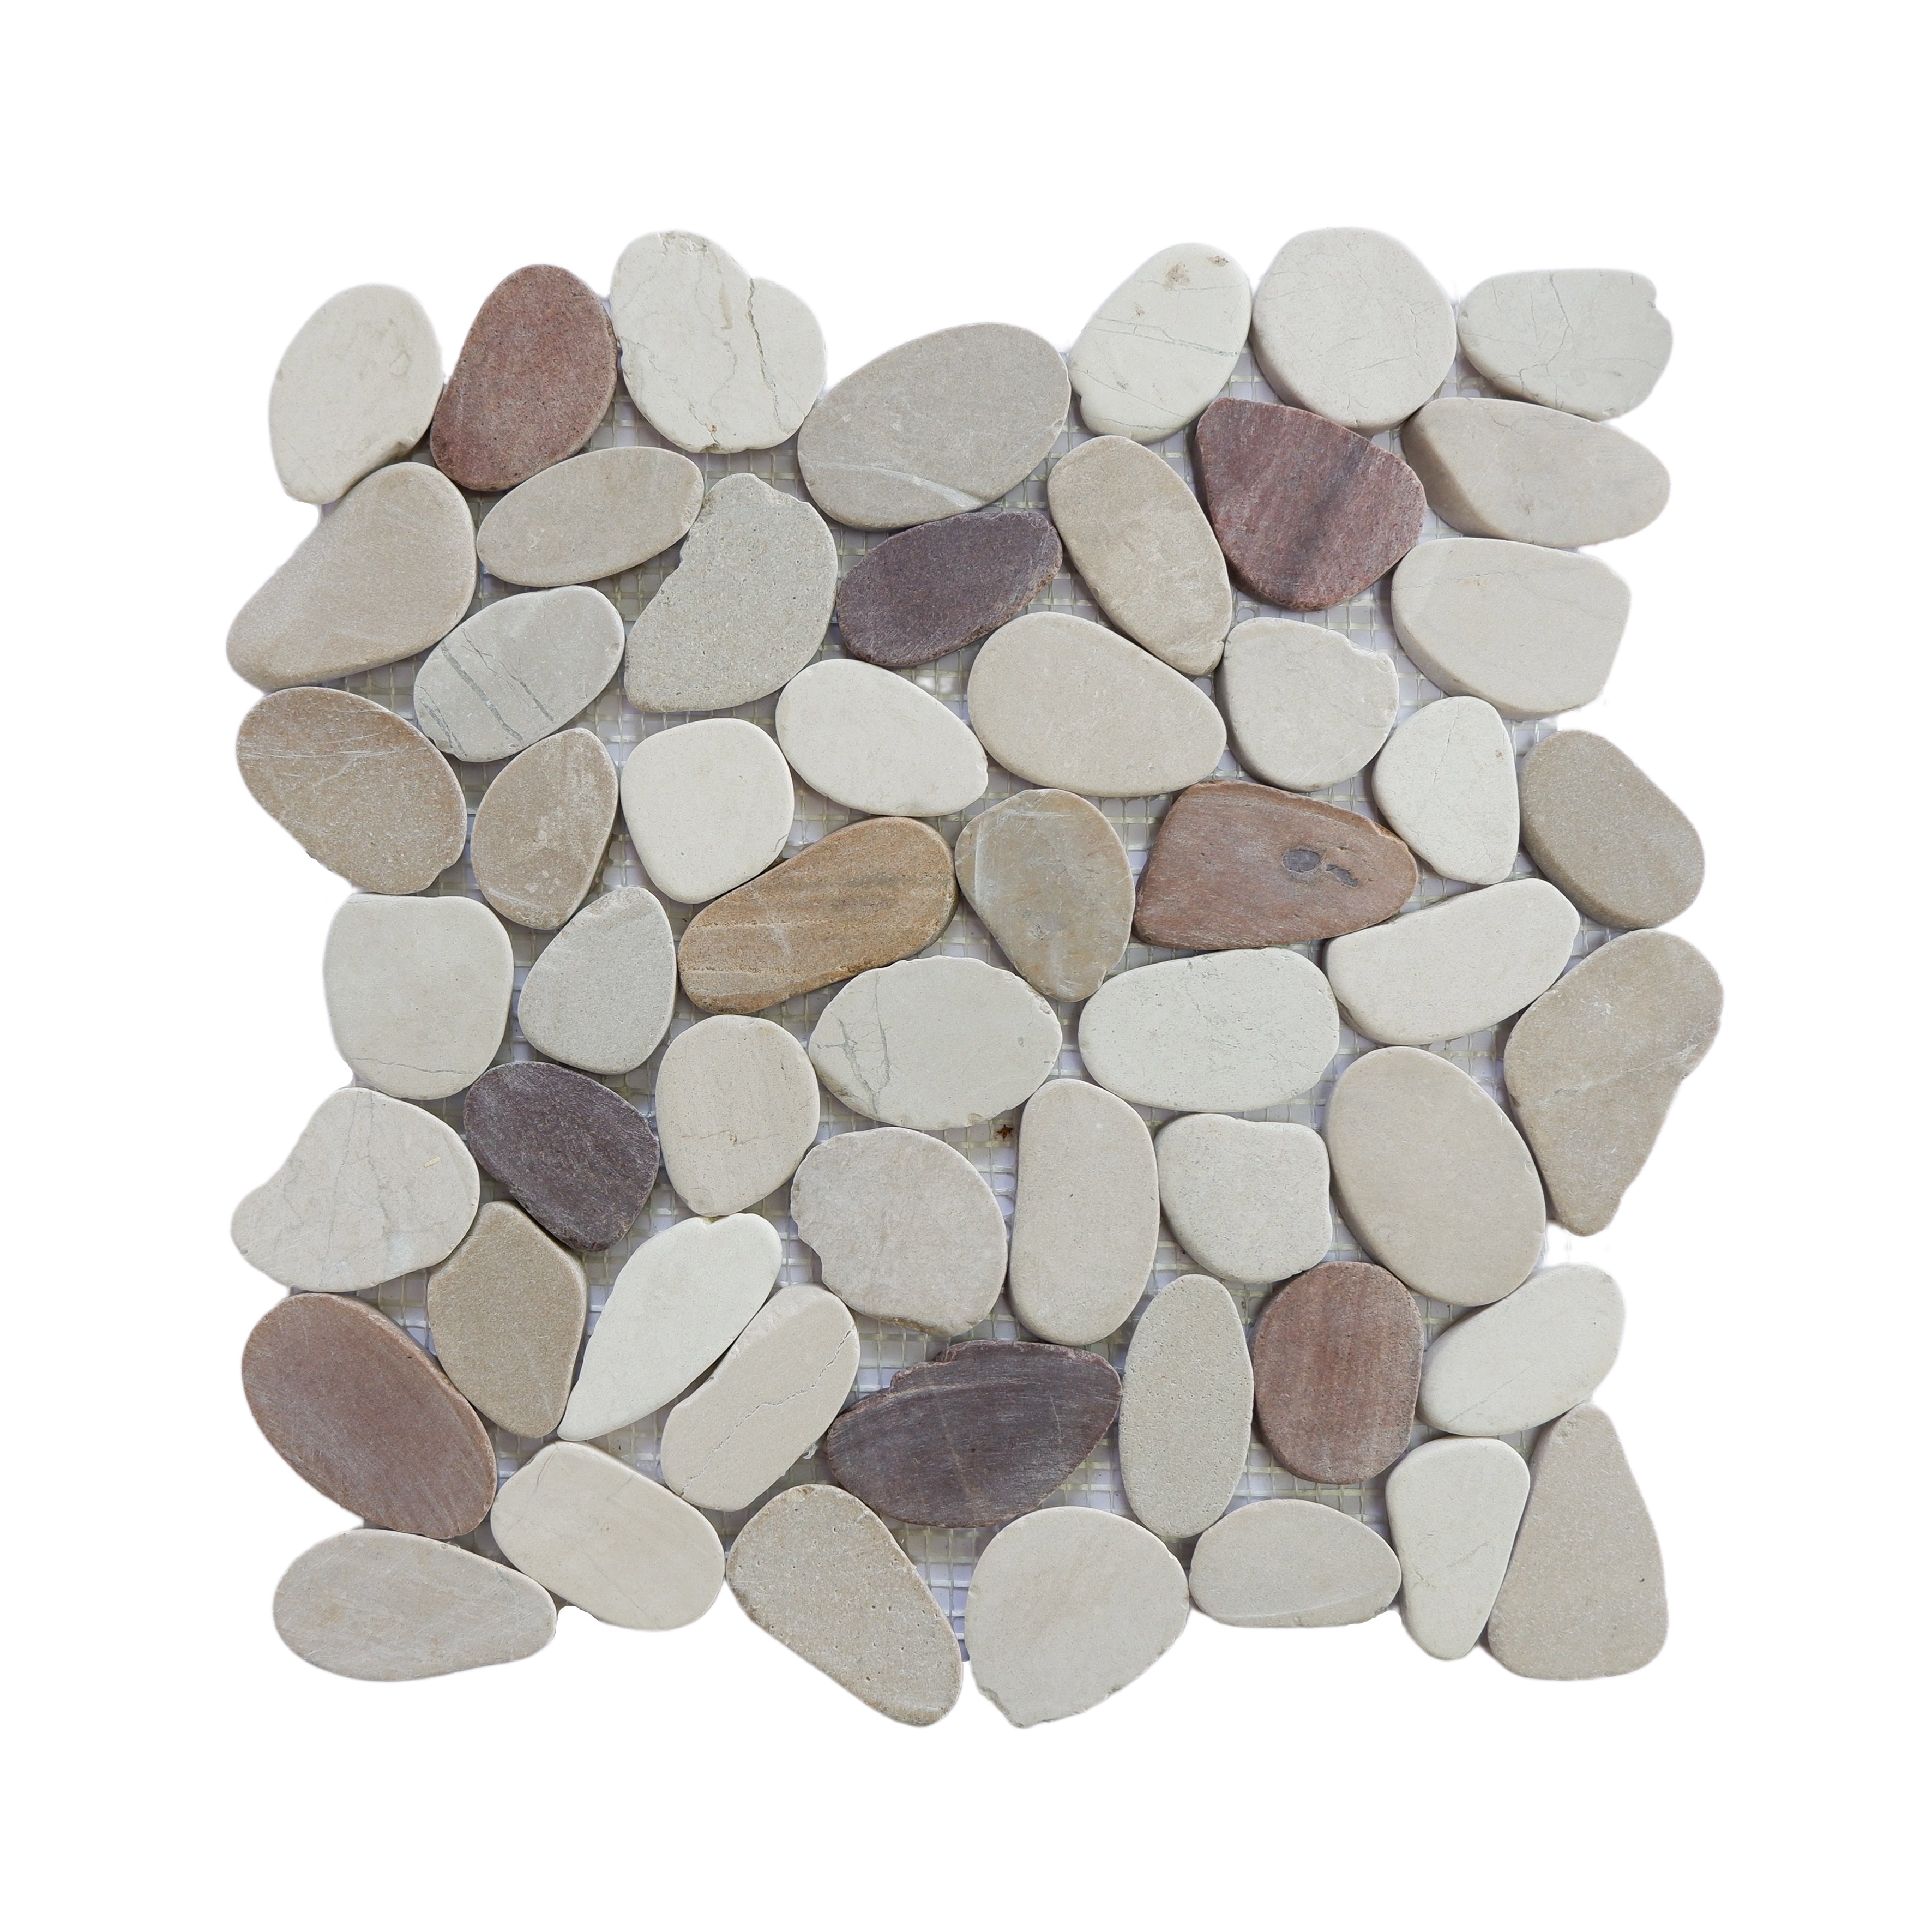 Cherry sliced pebble tile sample without grout